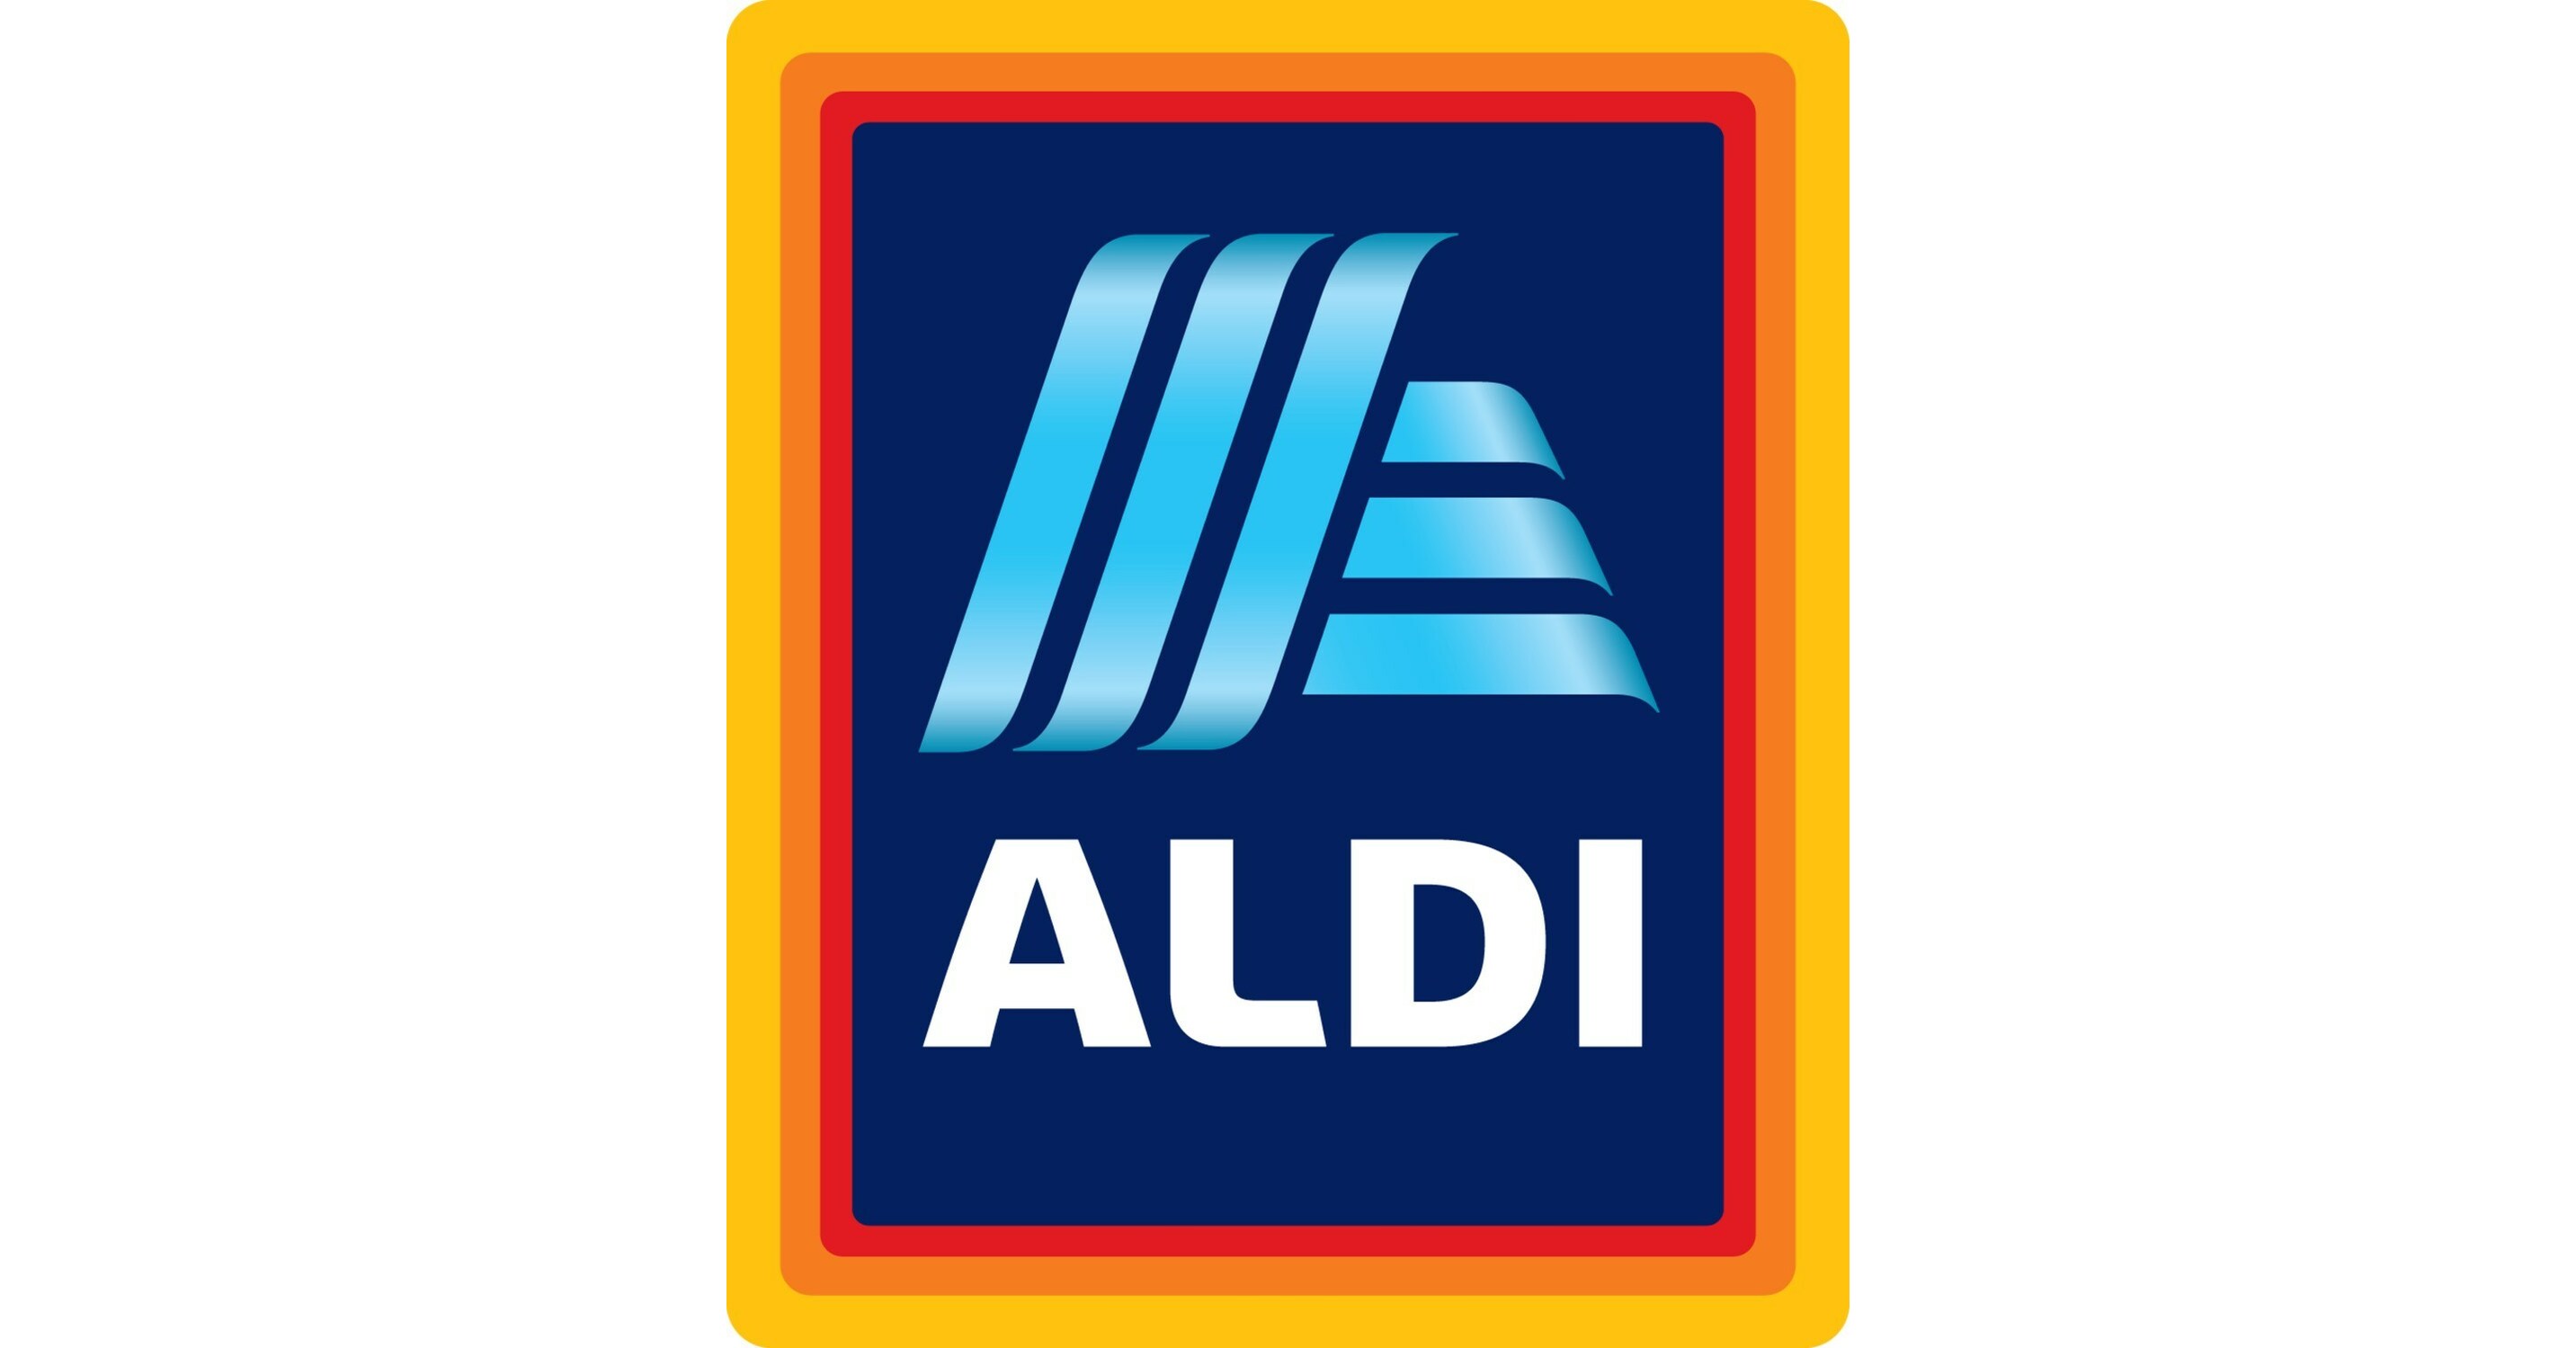 ALDI to Acquire Winn-Dixie and Harveys Supermarket to Continue Growth in the Southeast